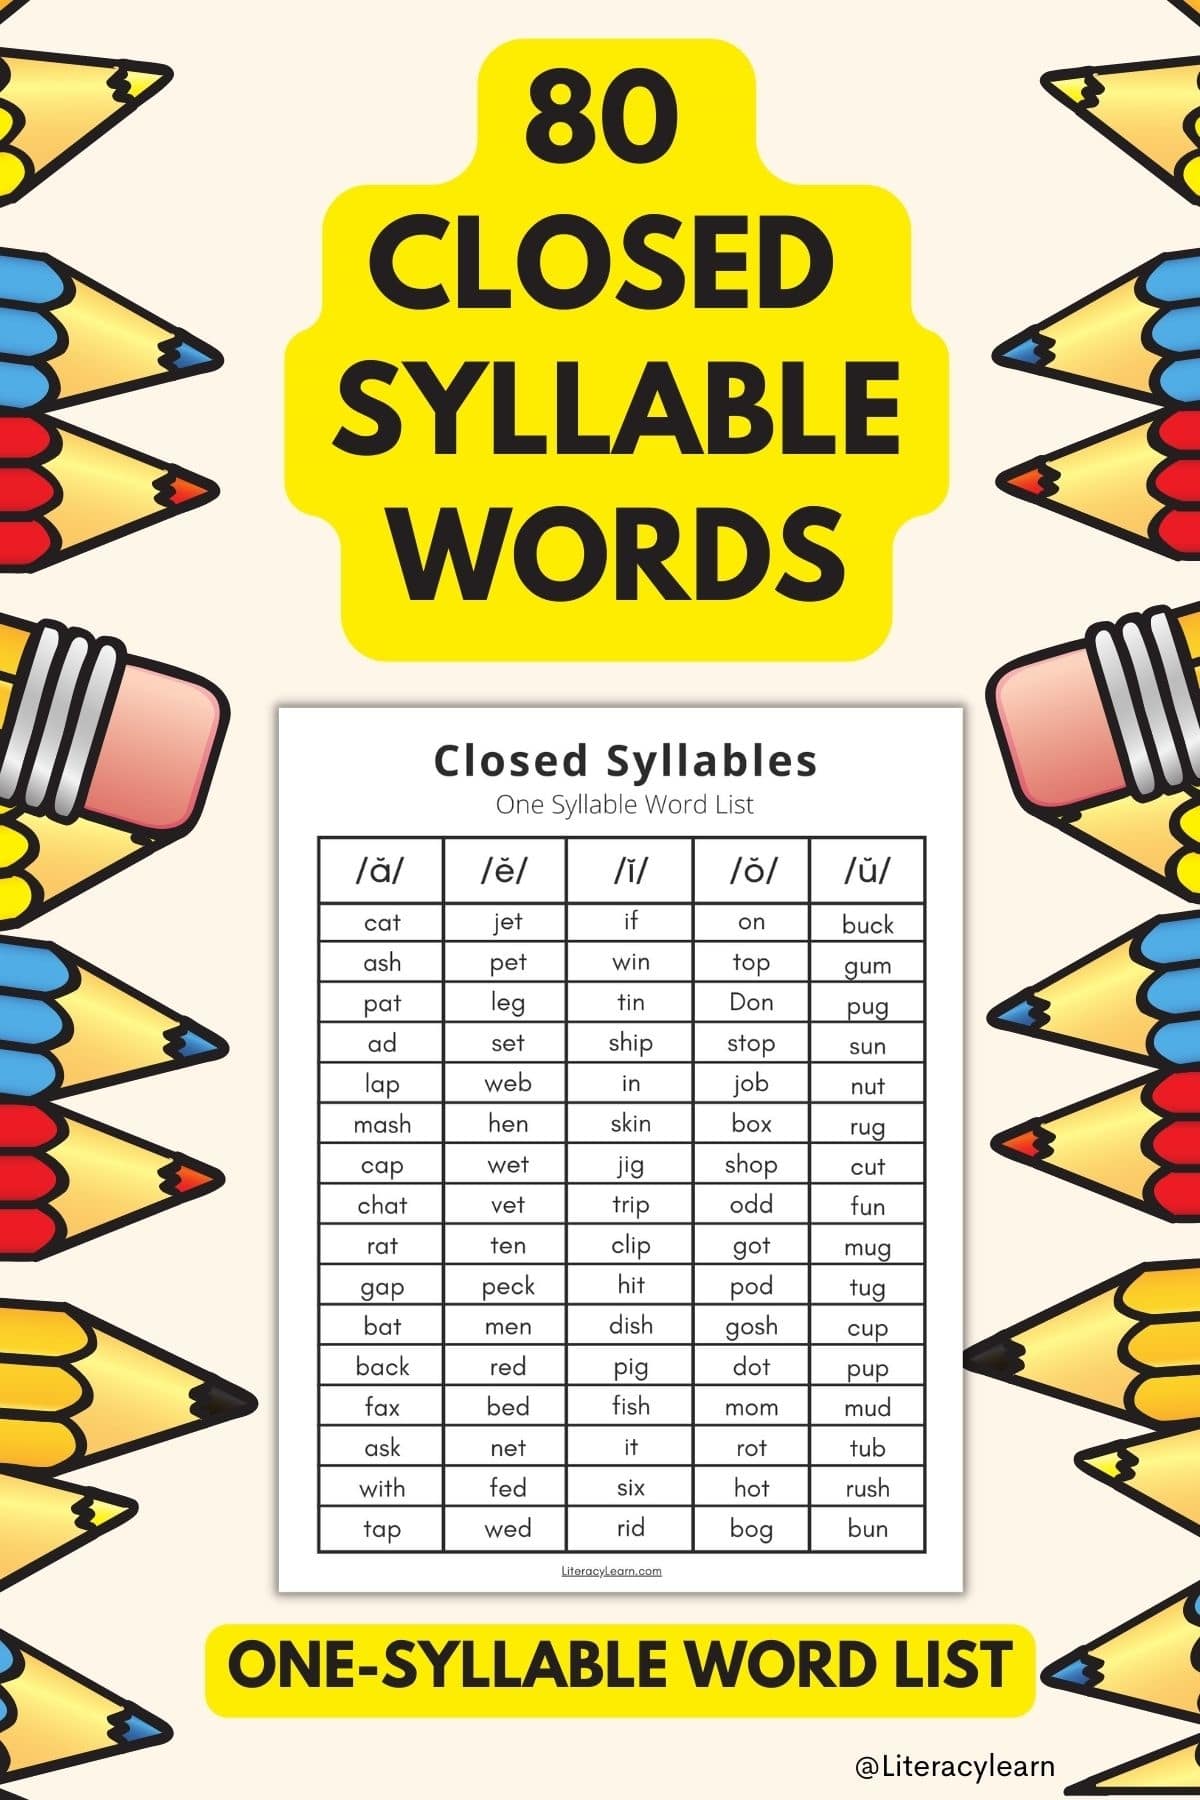 Image of closed syllables list, large text at top and bottom, and pencil graphics. 